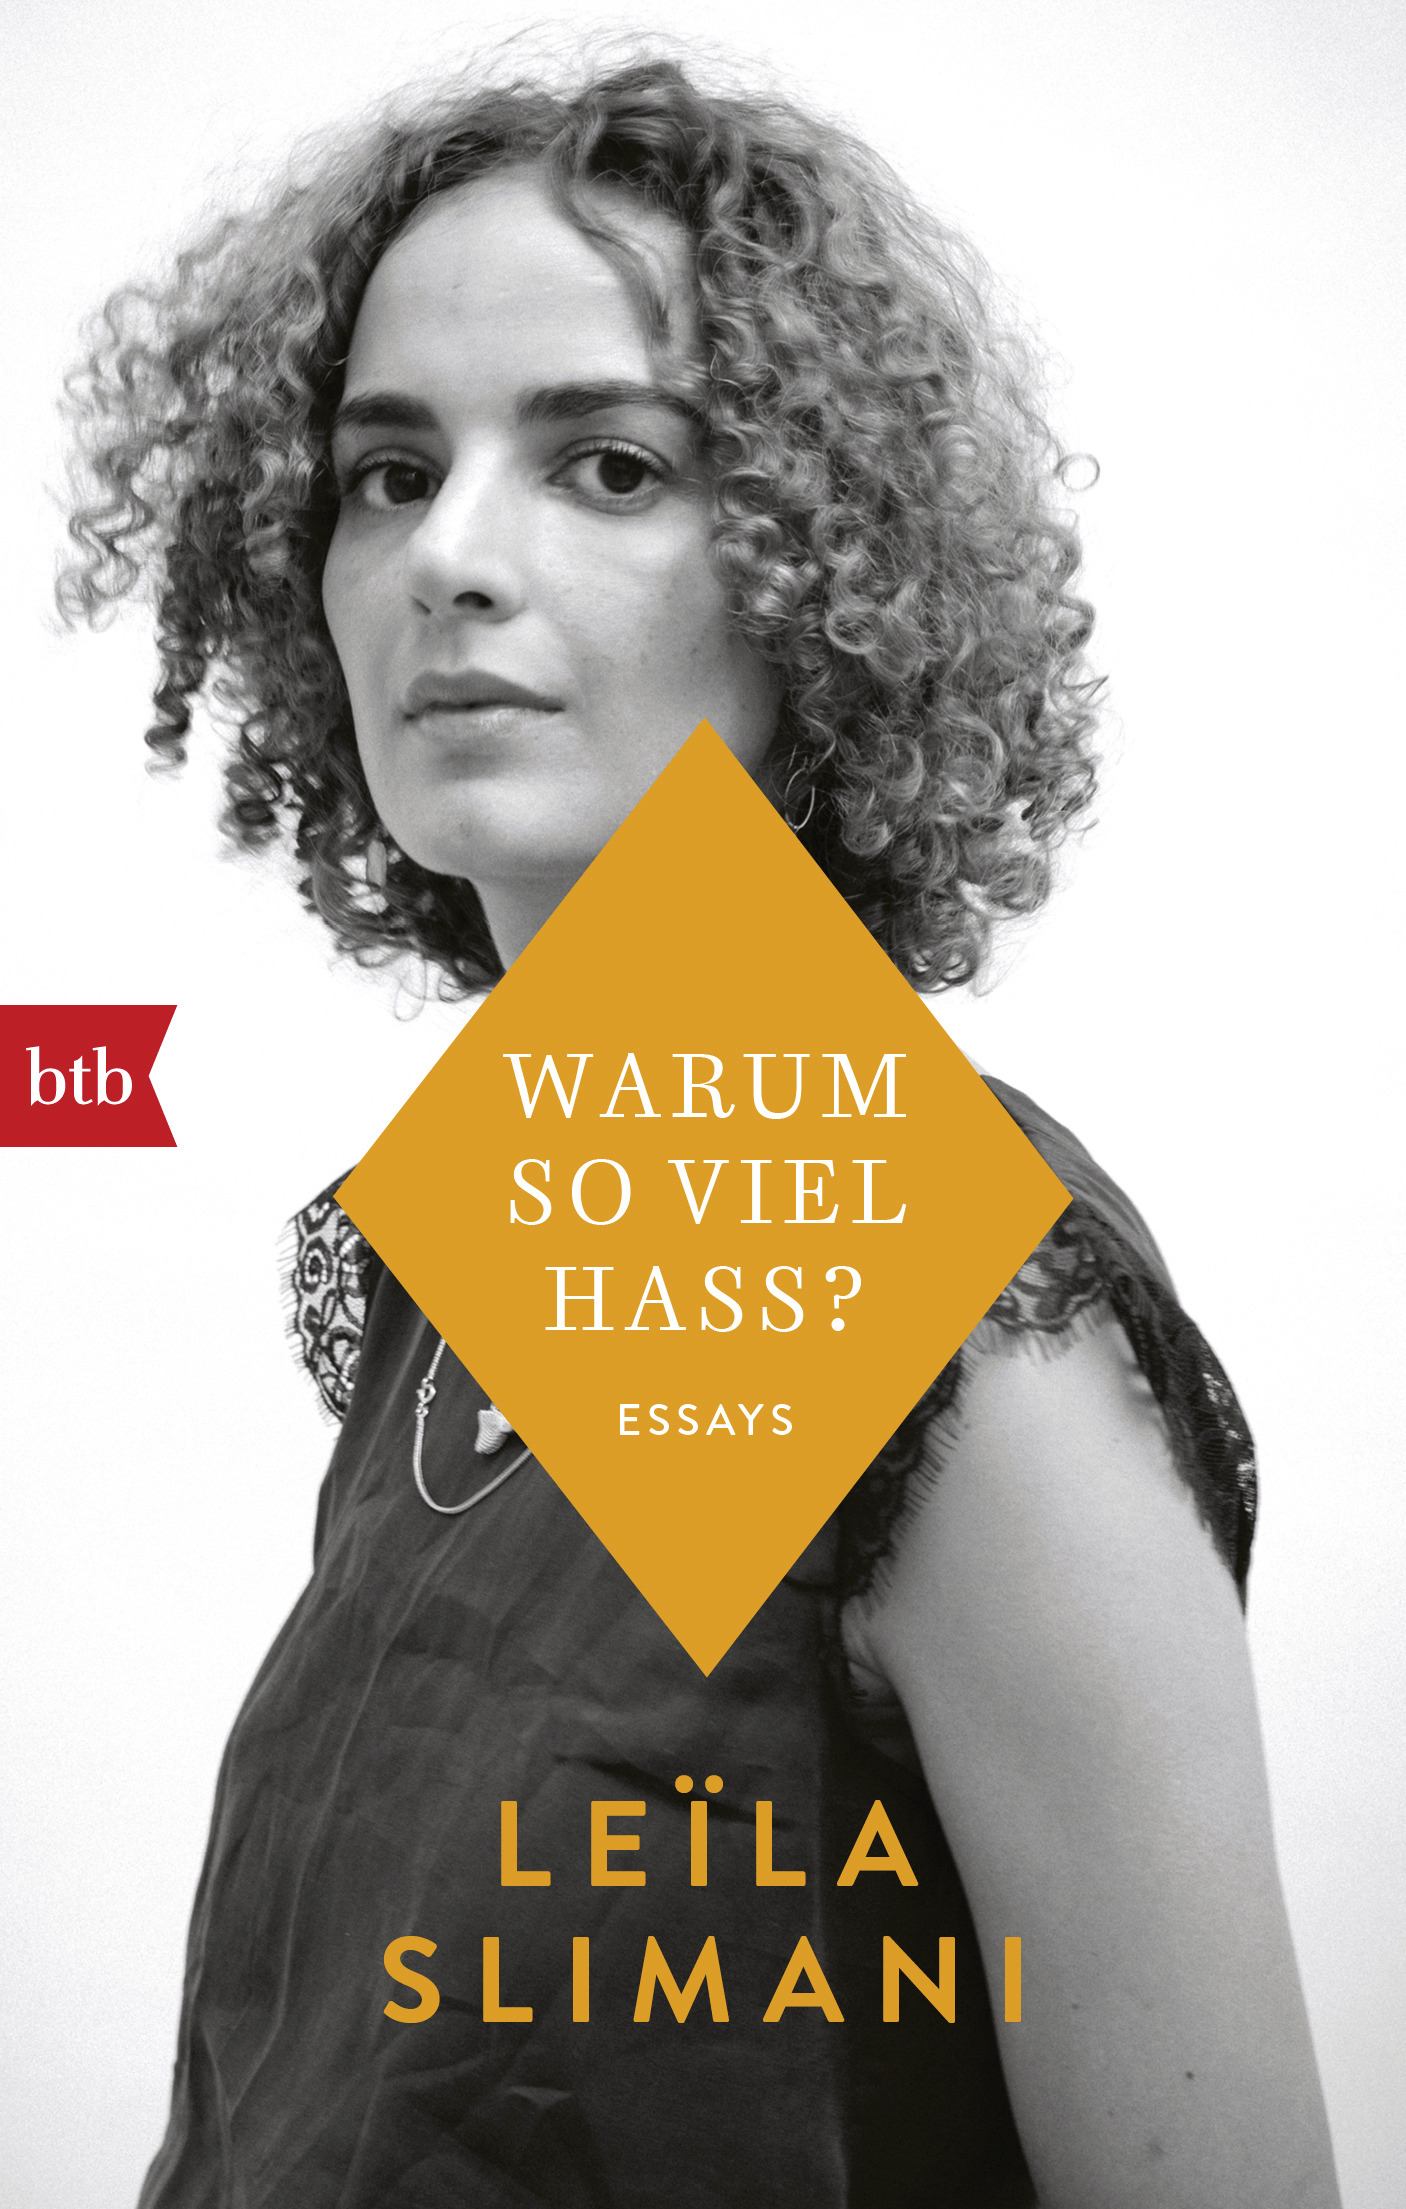 Cover of Leila Slimani's volume of essays "Warum so viel Hass?" - Why so much hate? (published in German by btb)